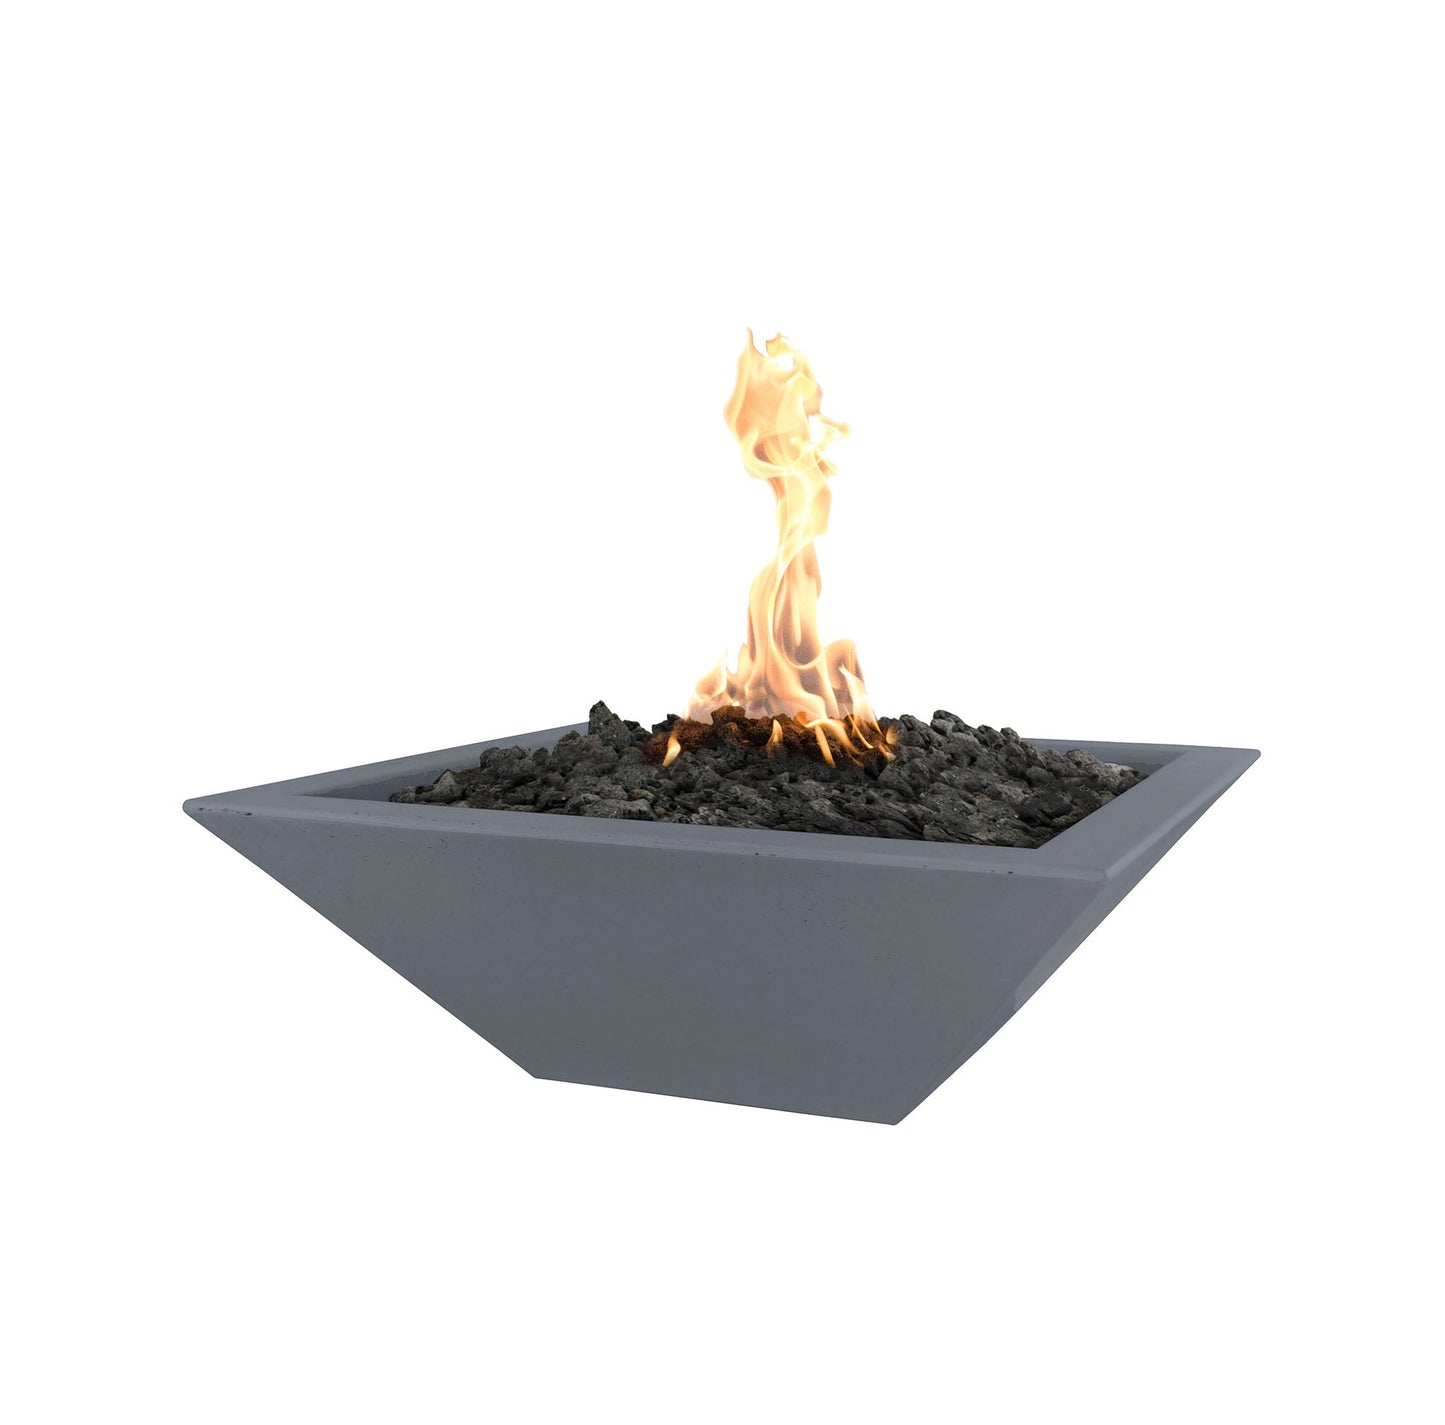 The Outdoor Plus Square Maya 36" Rustic White GFRC Concrete Natural Gas Fire Bowl with Match Lit with Flame Sense Ignition